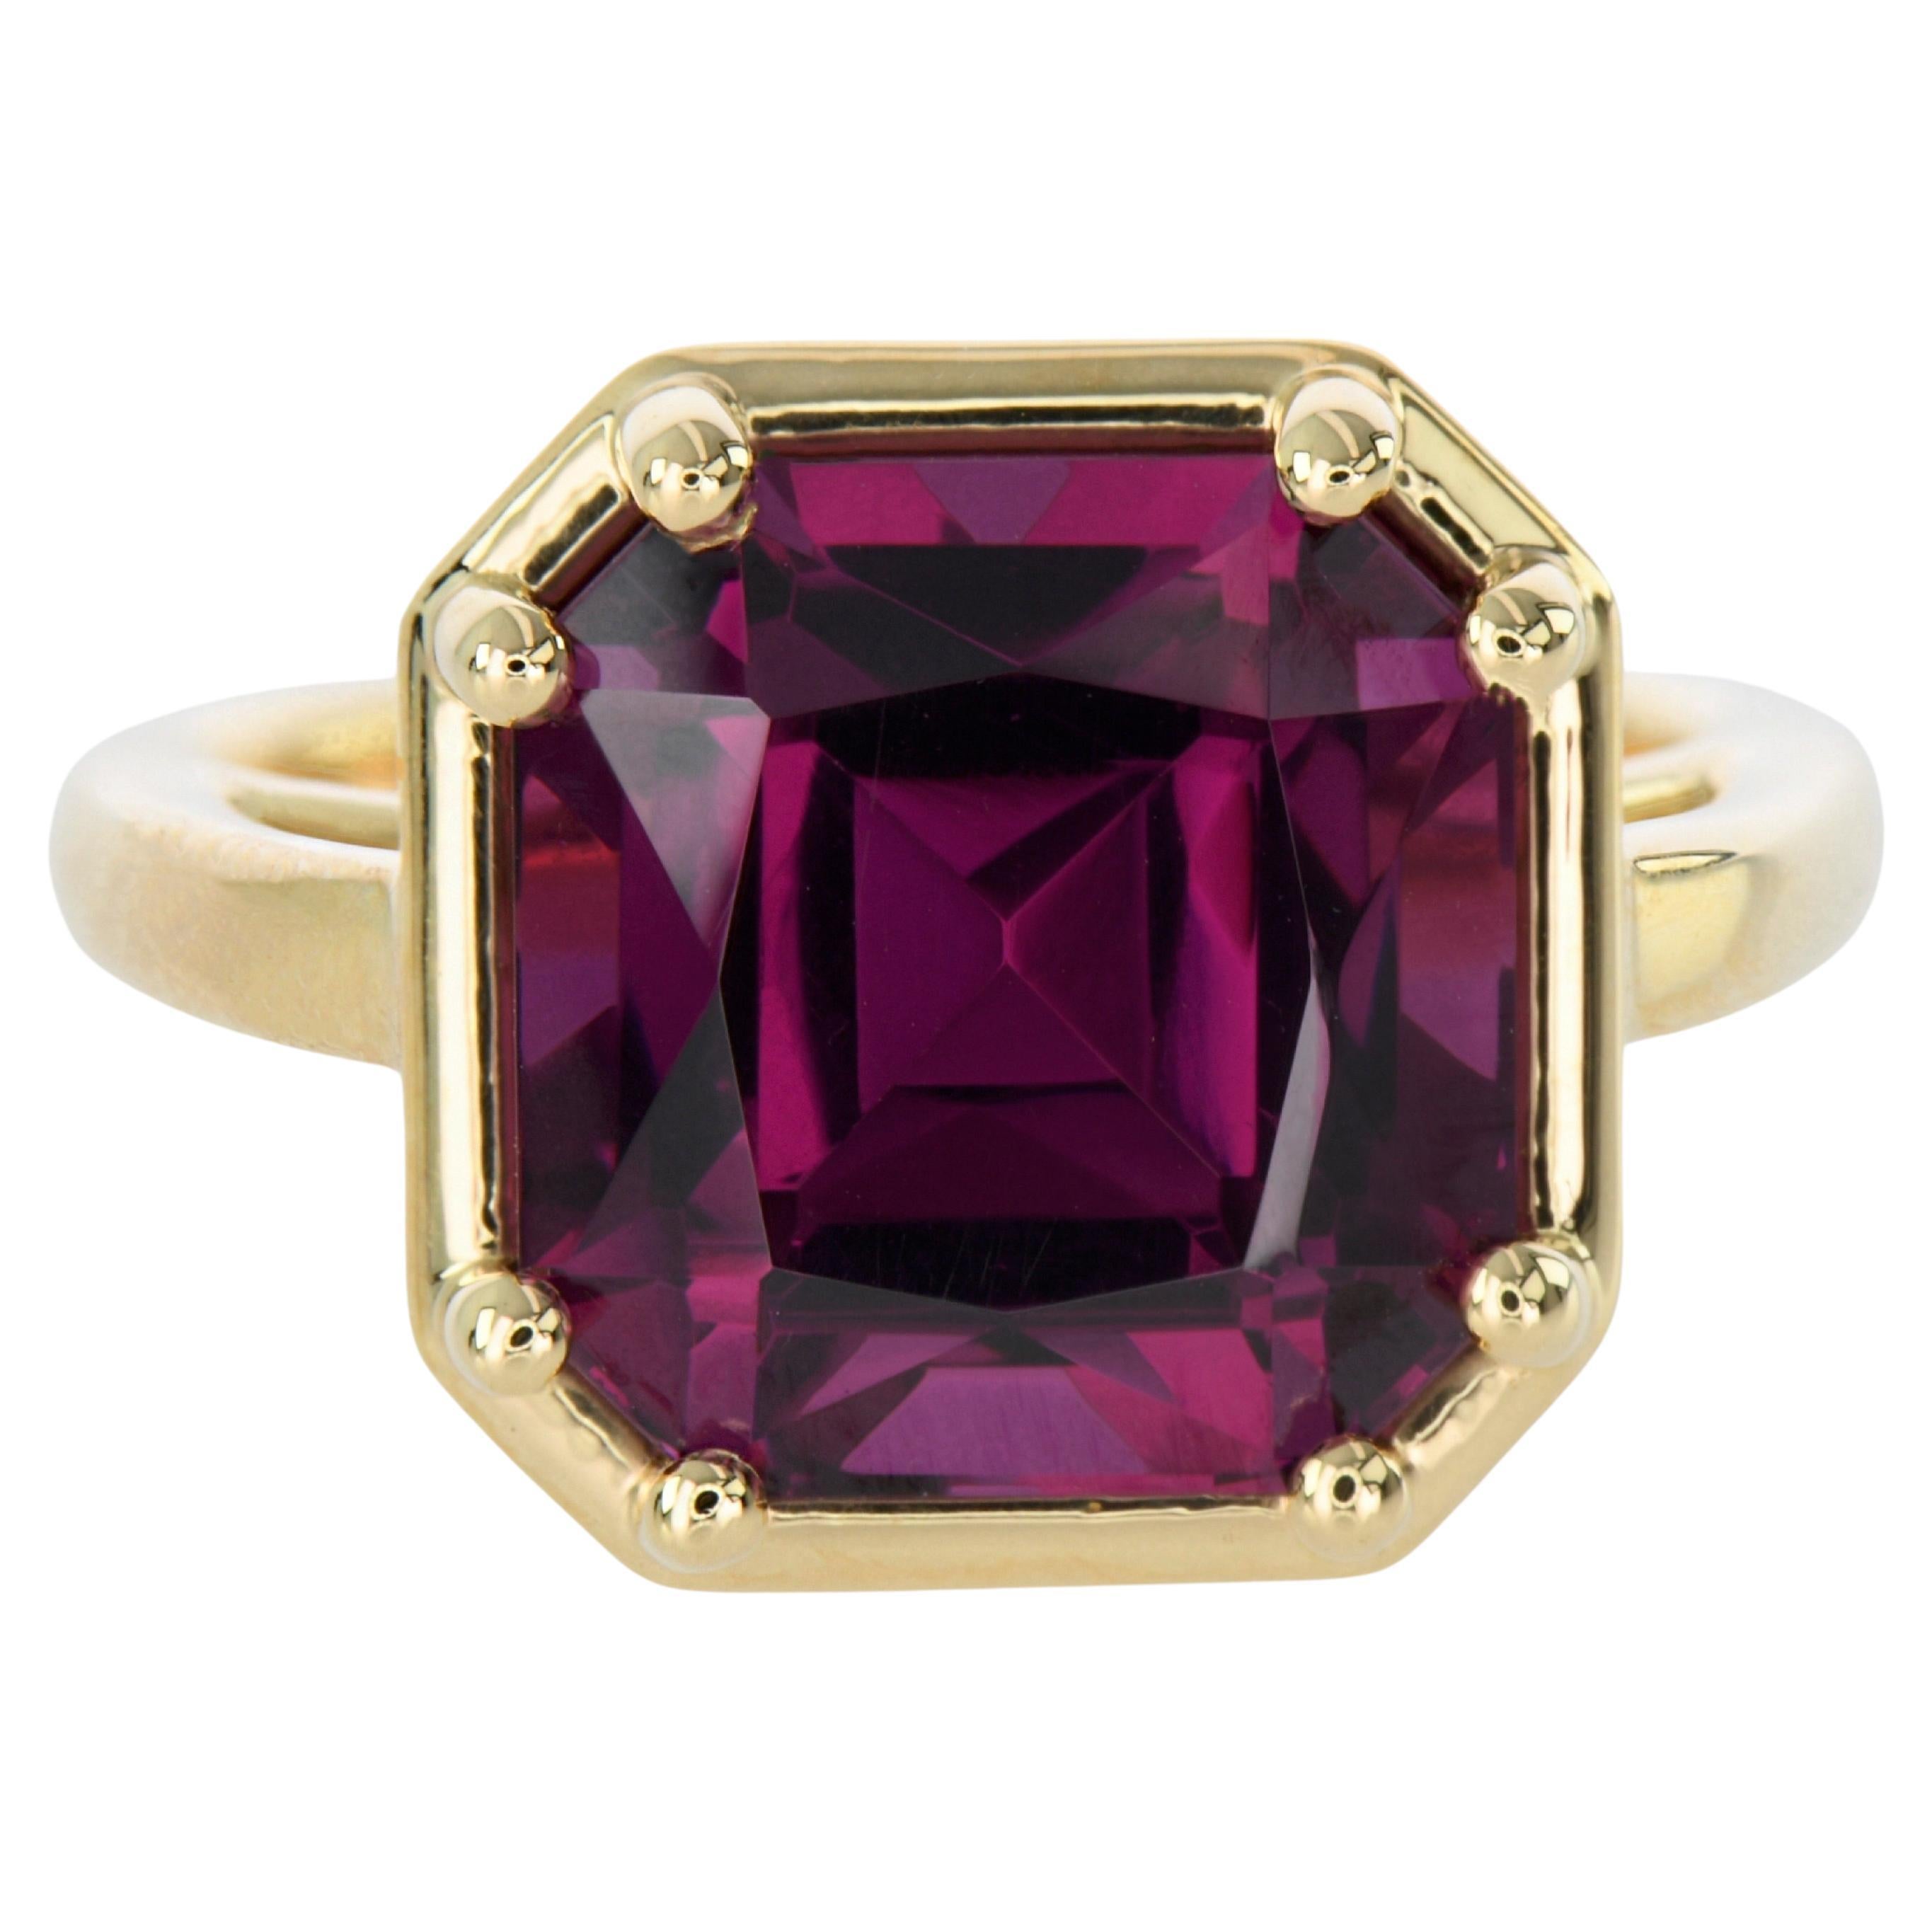 7.54 Rhodolite Ring-Radiant Cut-18KT Yellow Gold-GIA Certified-Rare